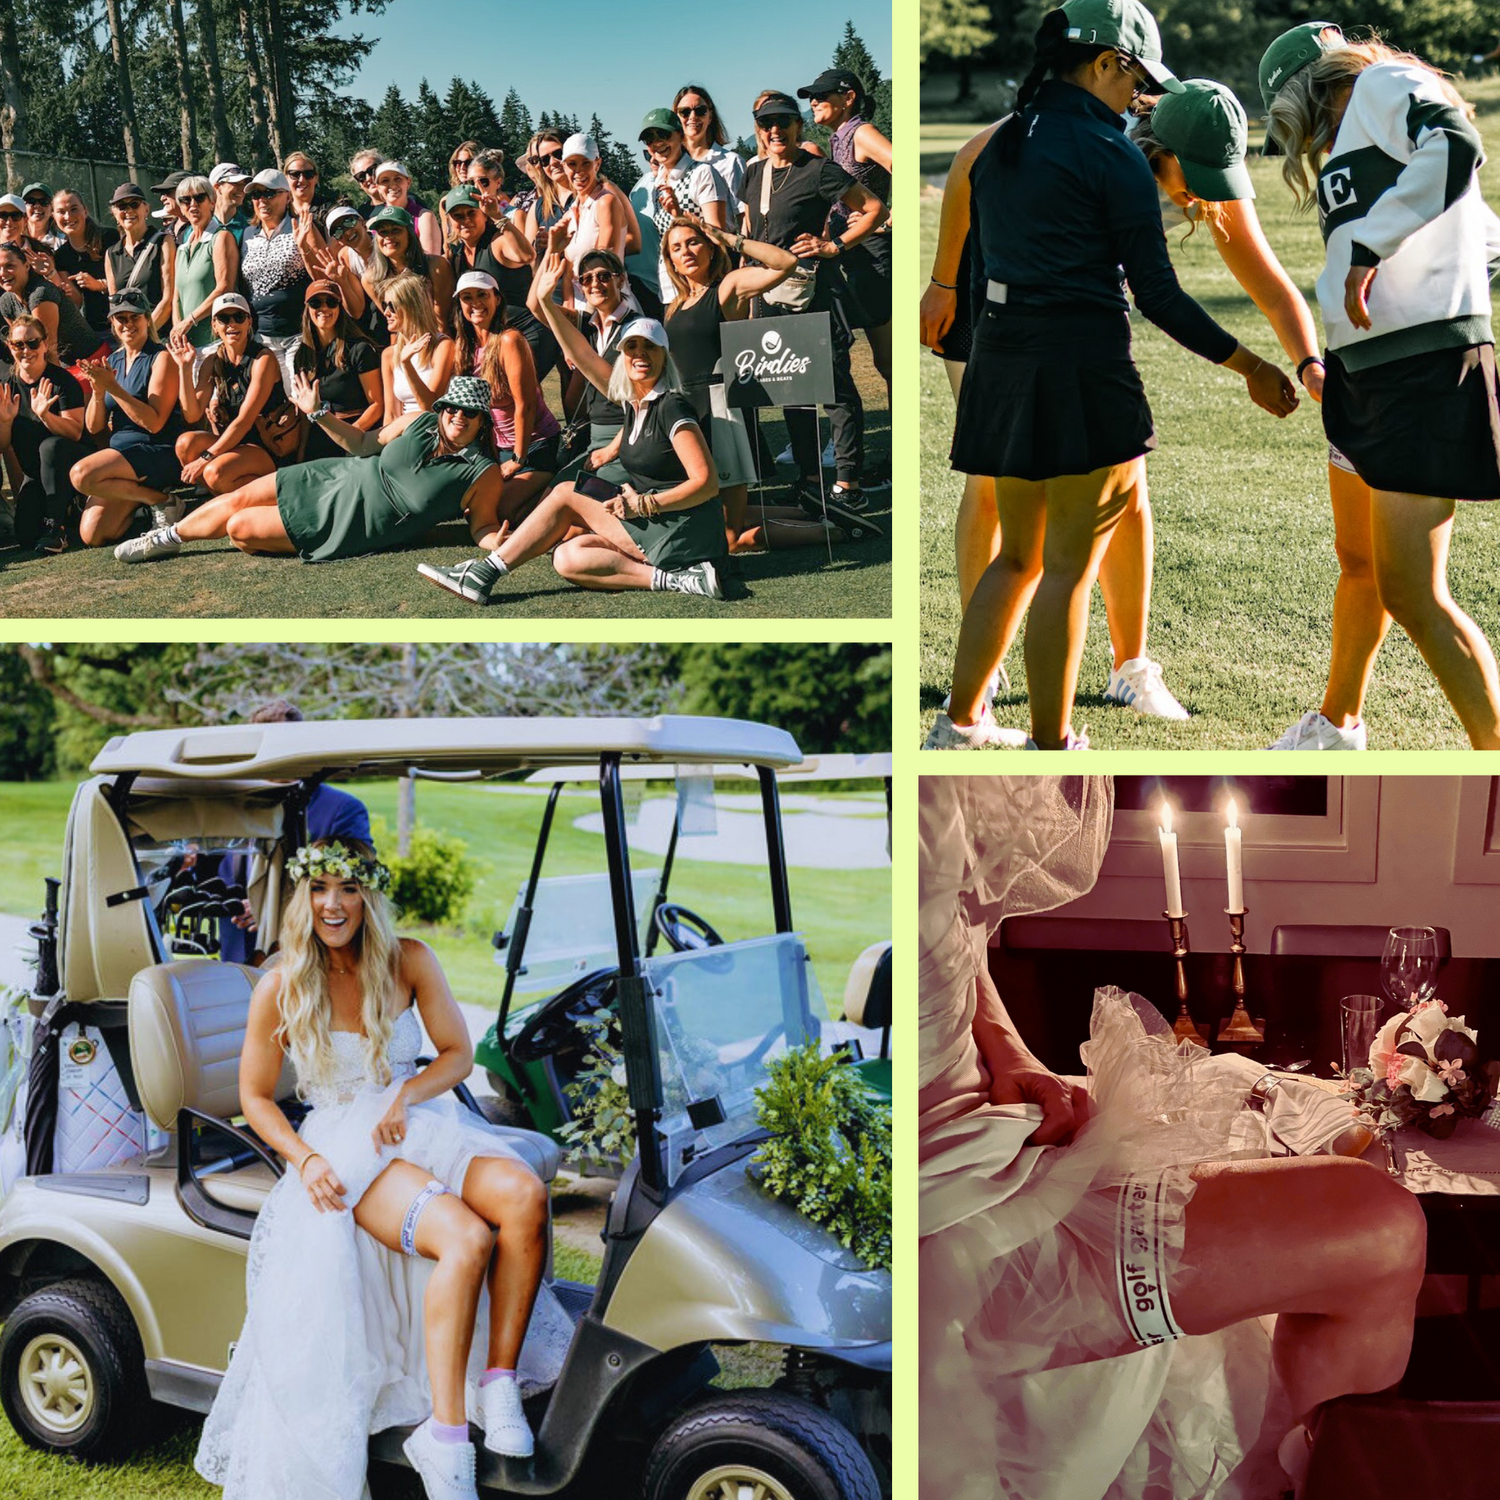 This a collage for four photos. In two photos, brides are showing a golf garter on their legs under their wedding dresses. The other two photos are groups of women having fun on the golf course.